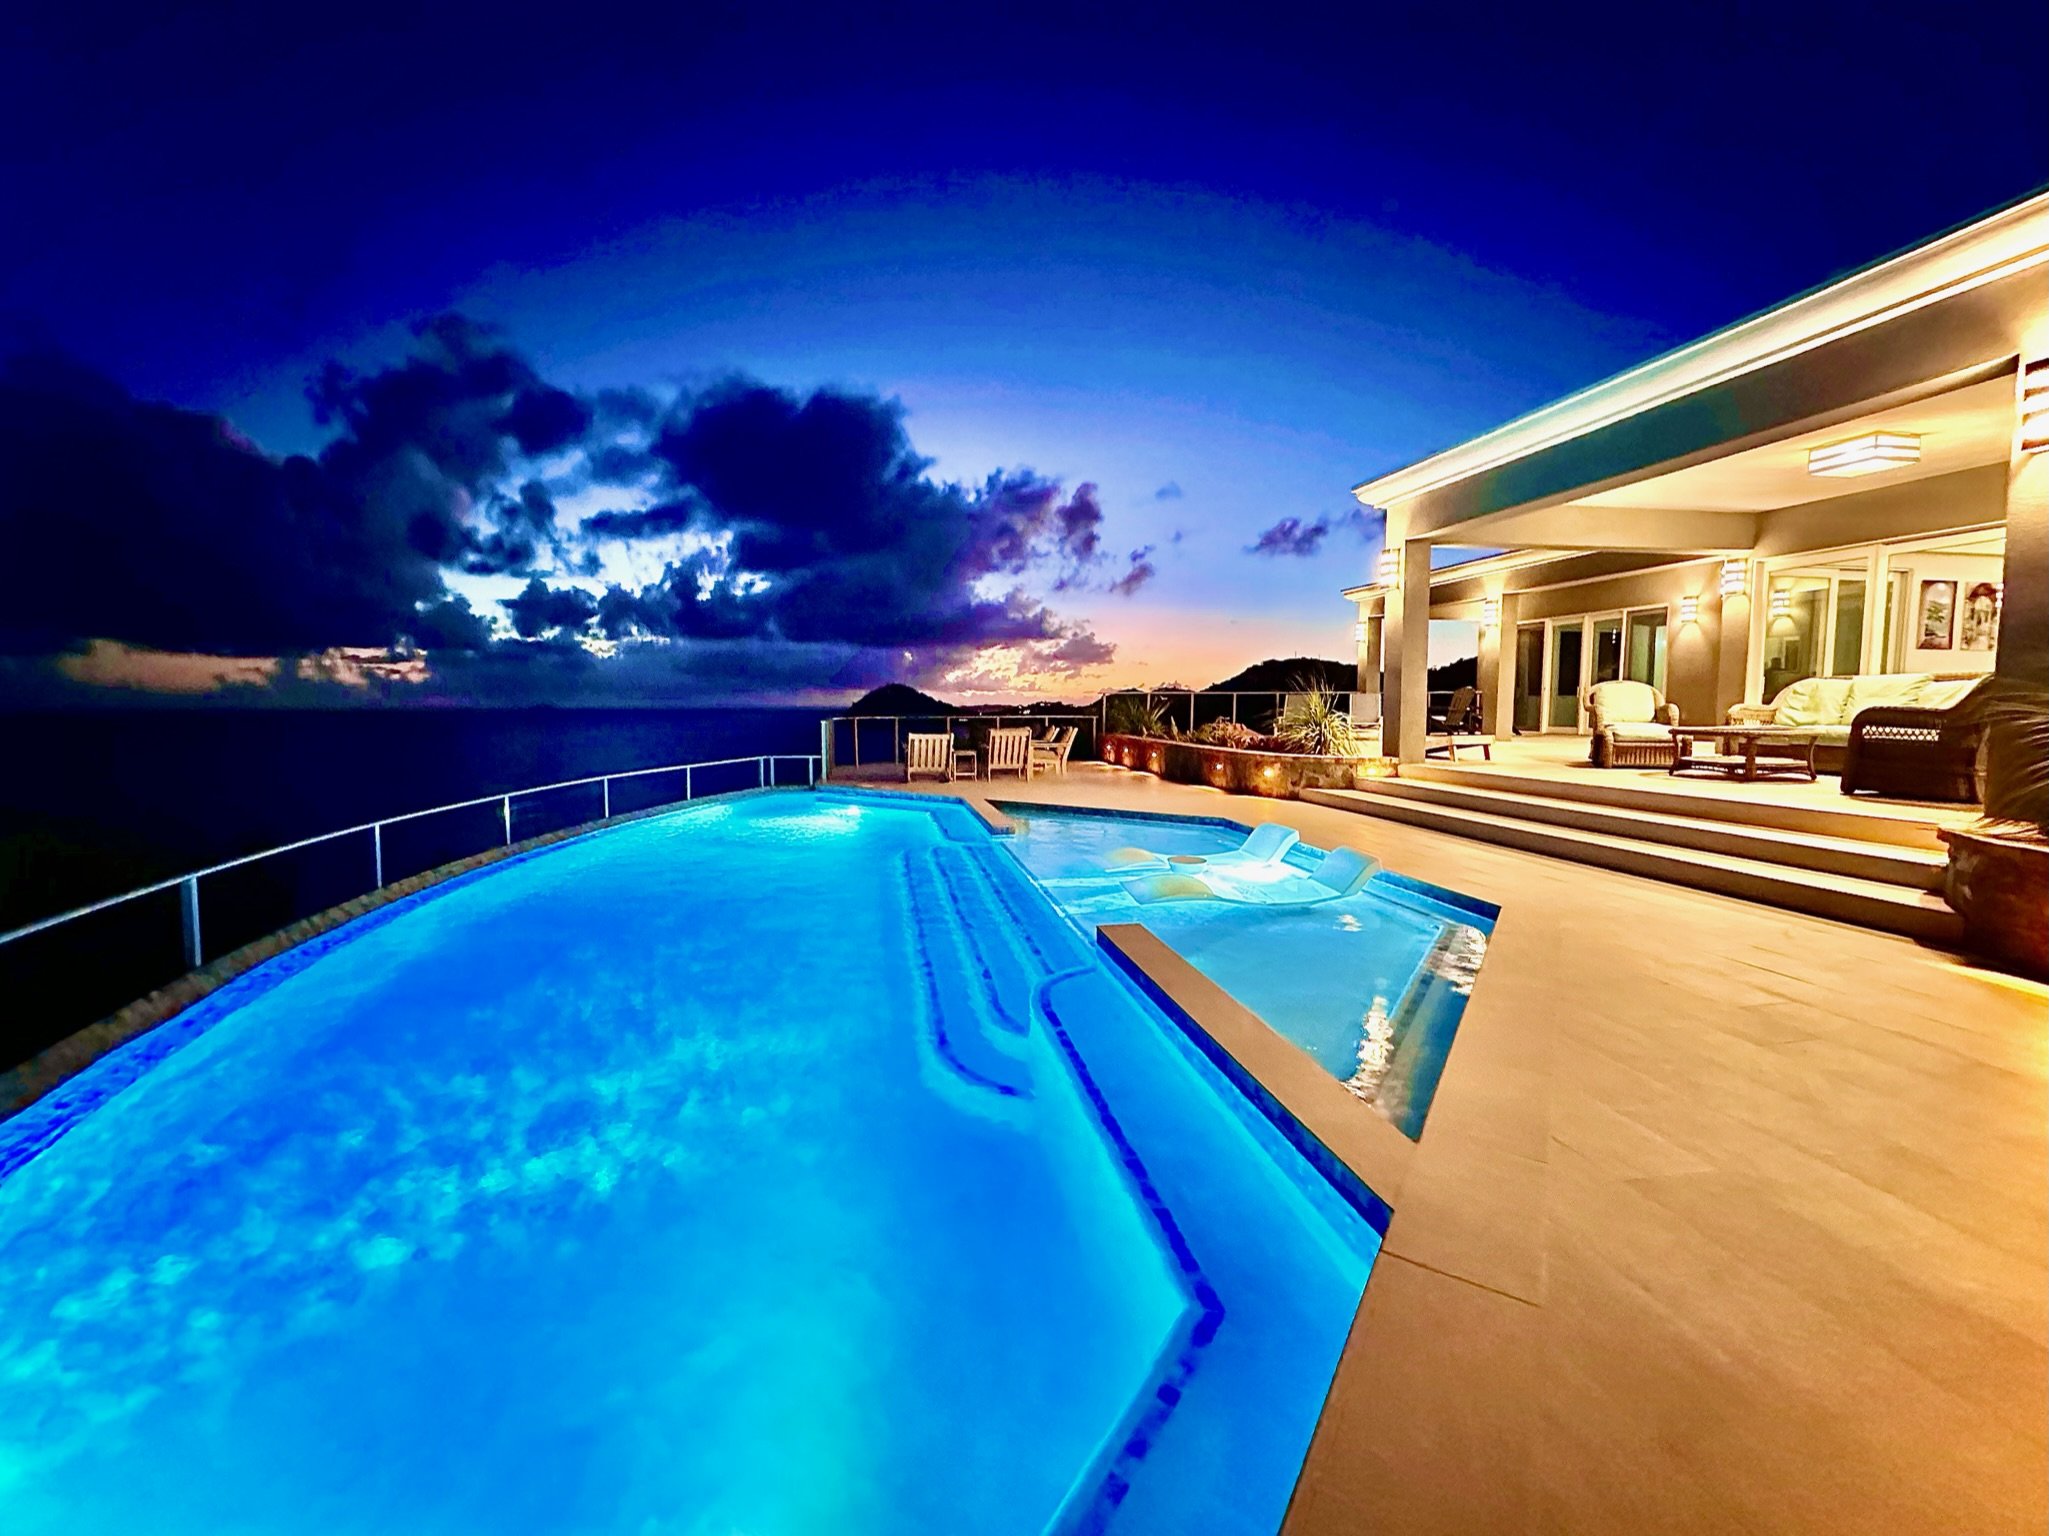 Driftwood Villa Outdoor Pool Lighting and Sunset in the Background.JPG